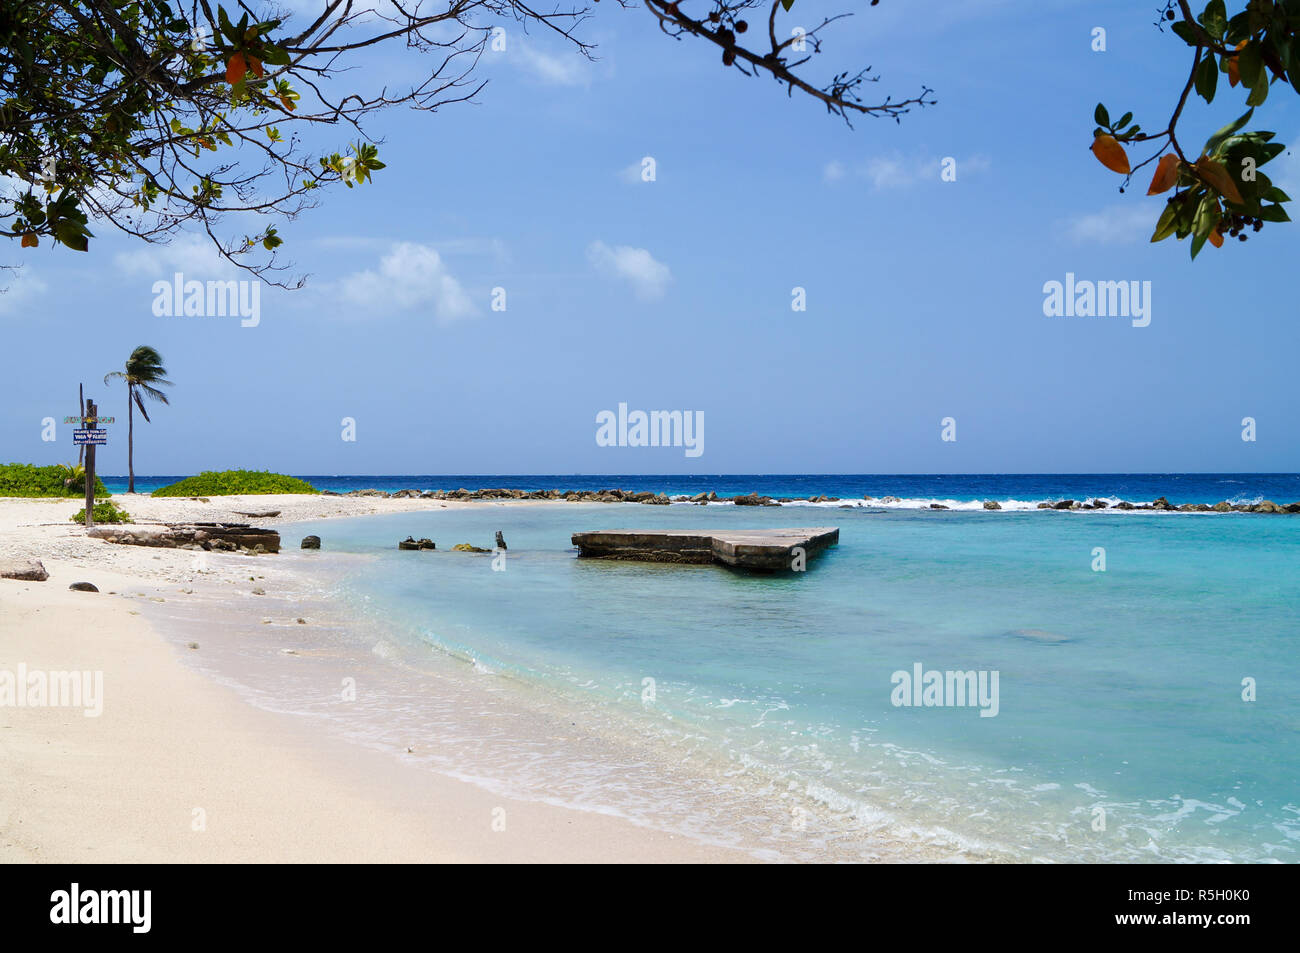 Hidden beach with white sand and blue water in Curacao Stock Photo